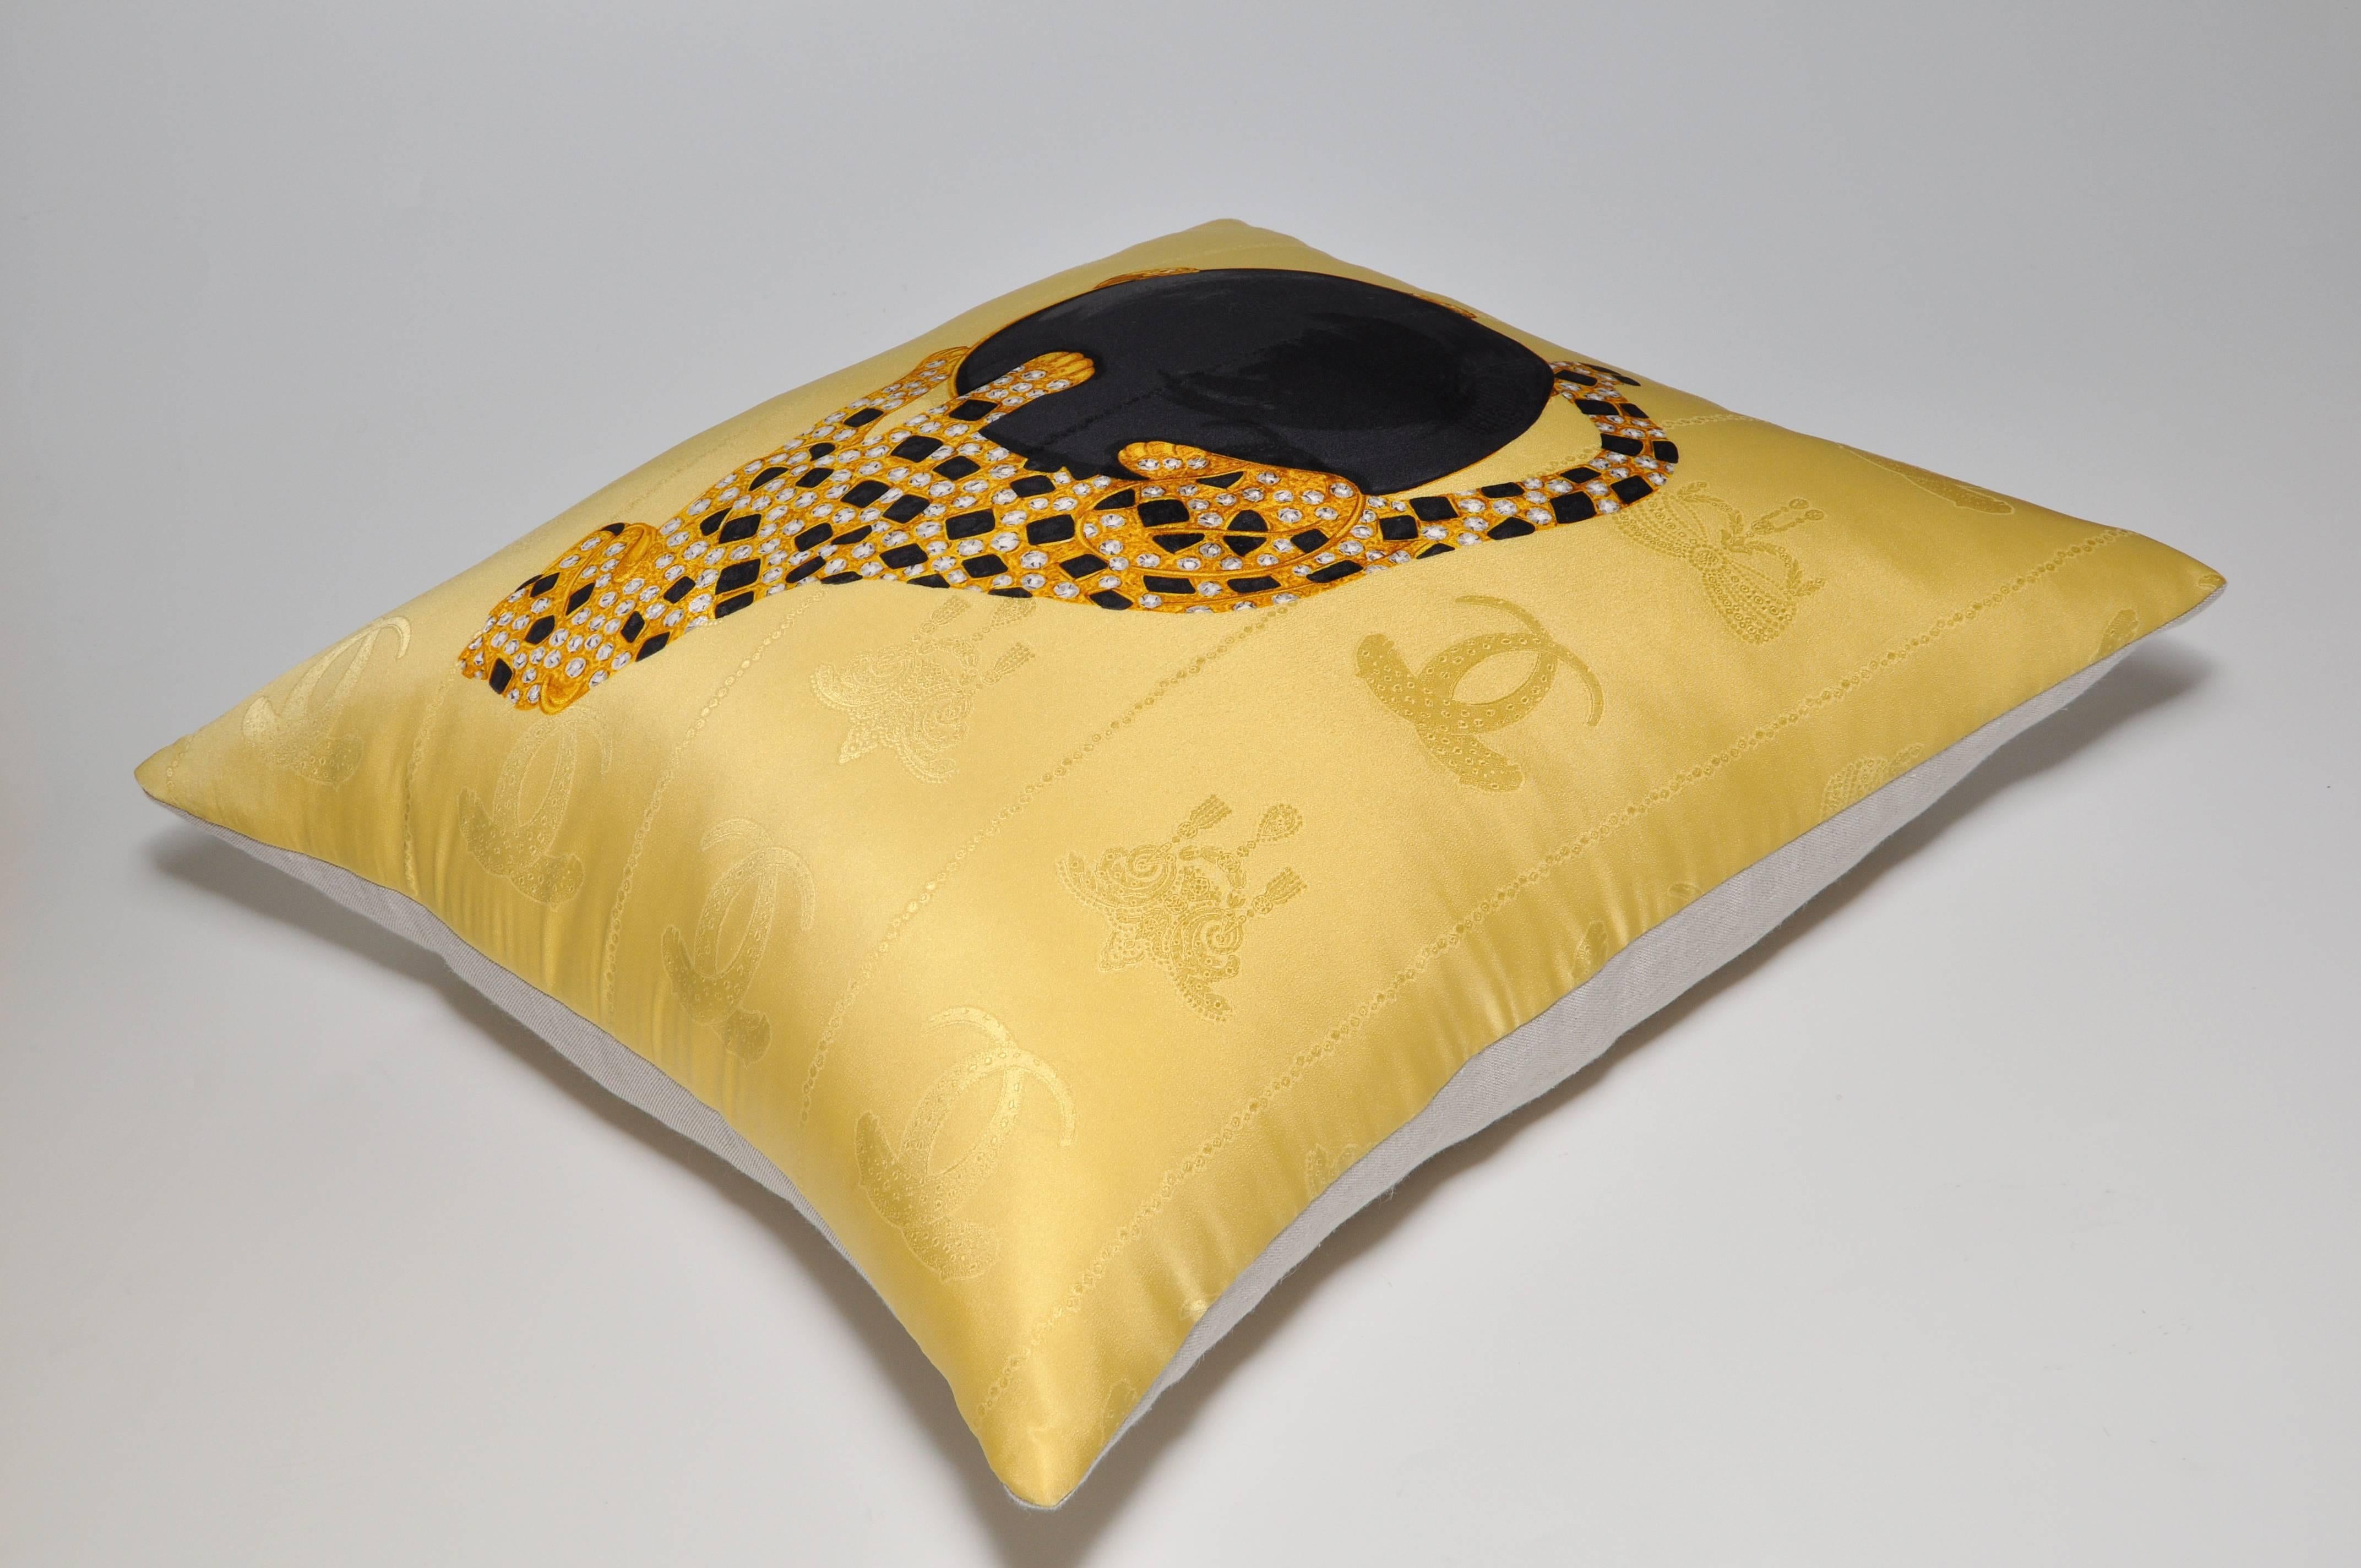 Baroque Gold Vintage Cartier Panther Jewelry Silk Scarf Cushion Pillow For Sale